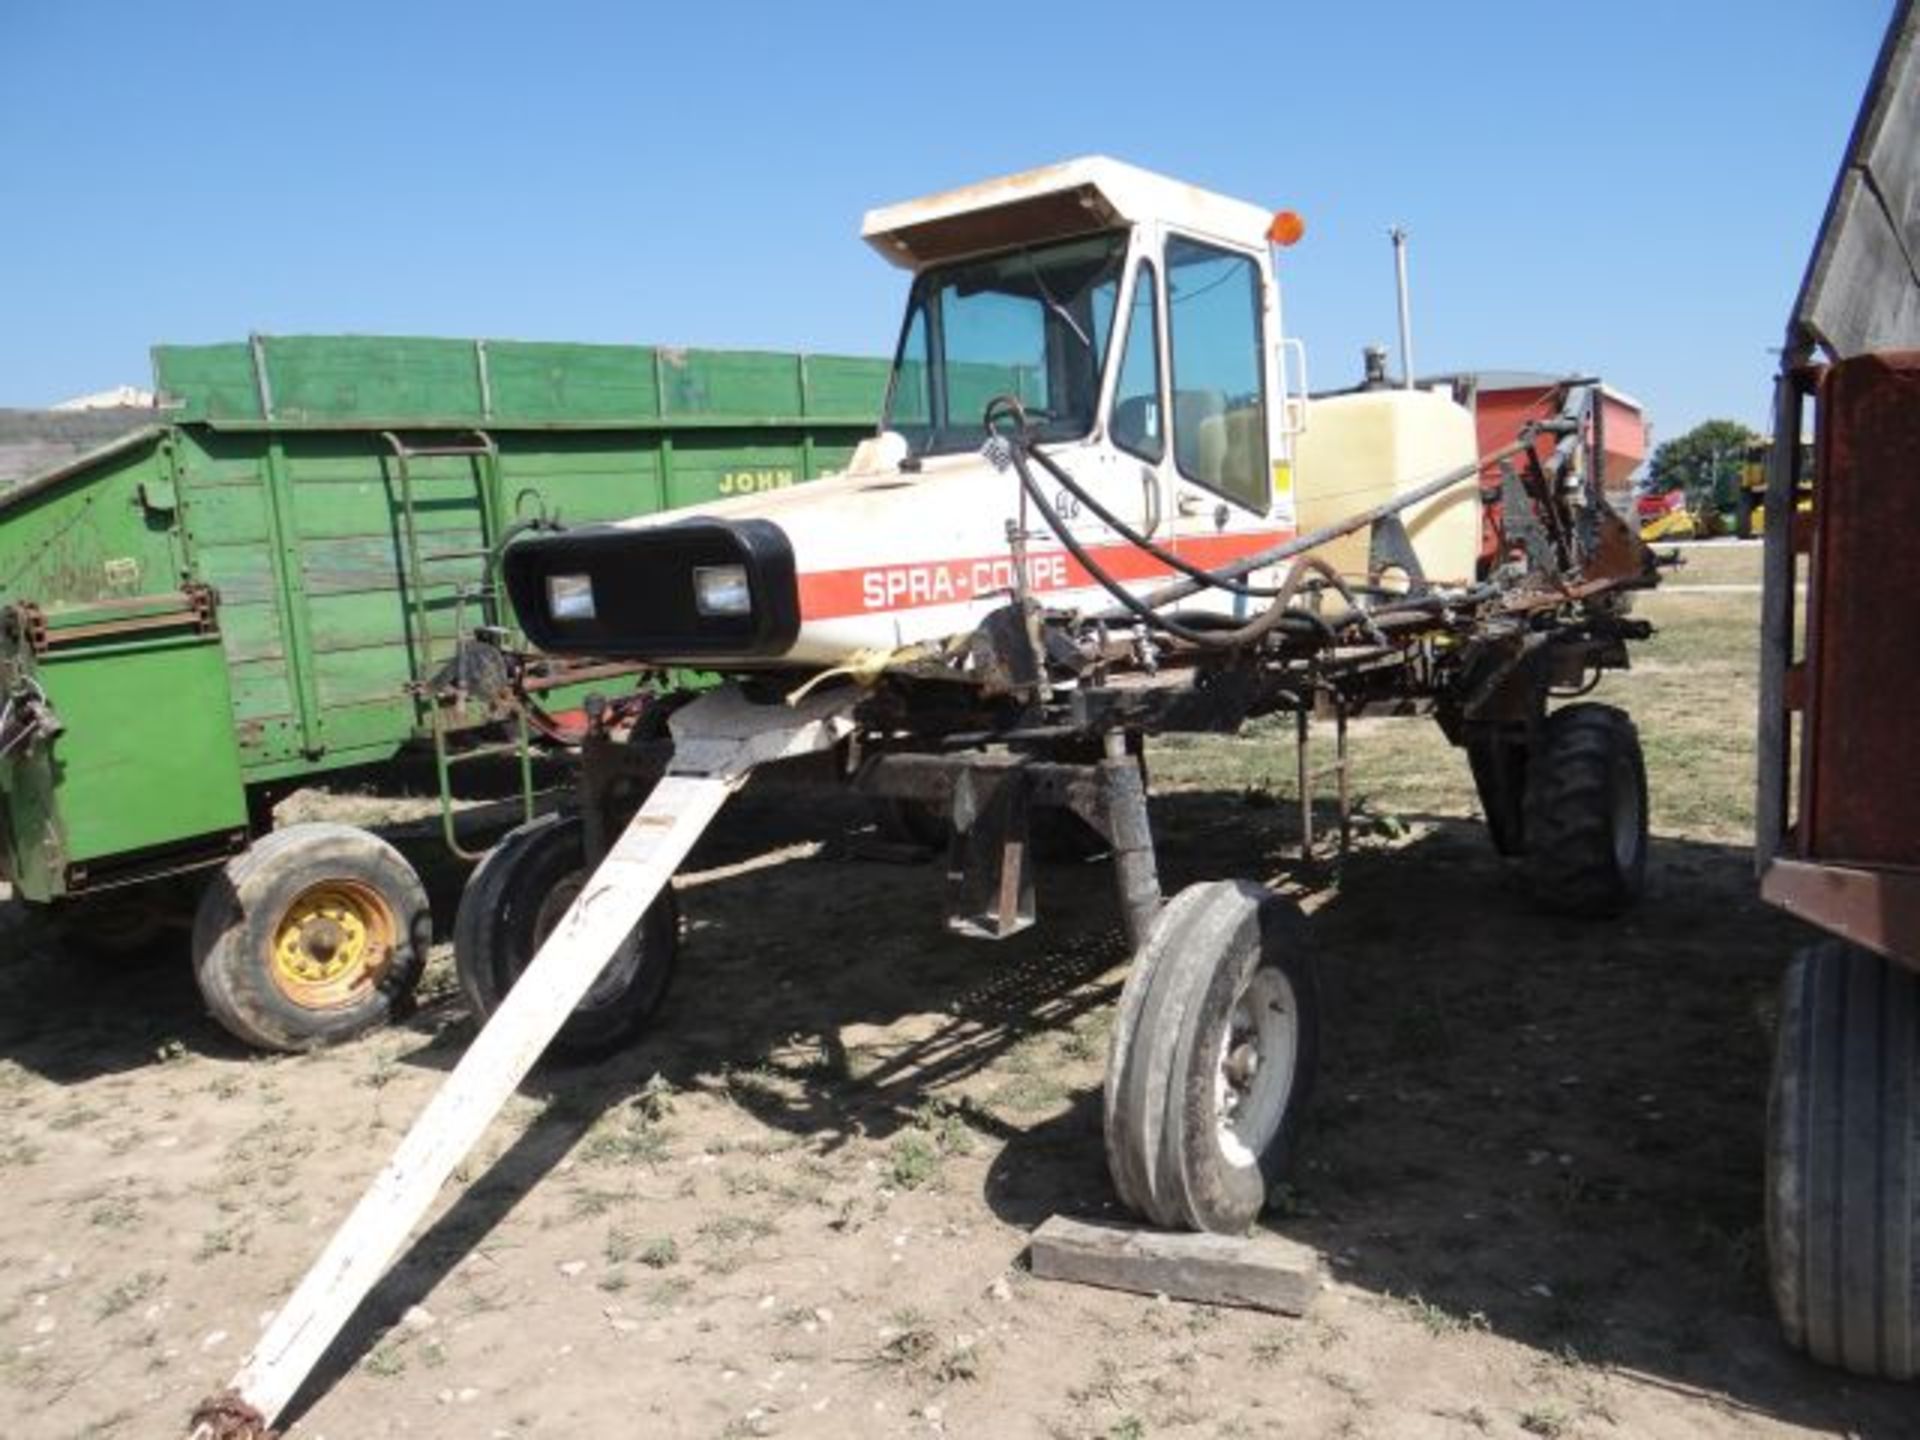 Spray Coupe Melroe 220 Sprayer 52' Booms, Runs Good, AC Works, Control Monitor Works